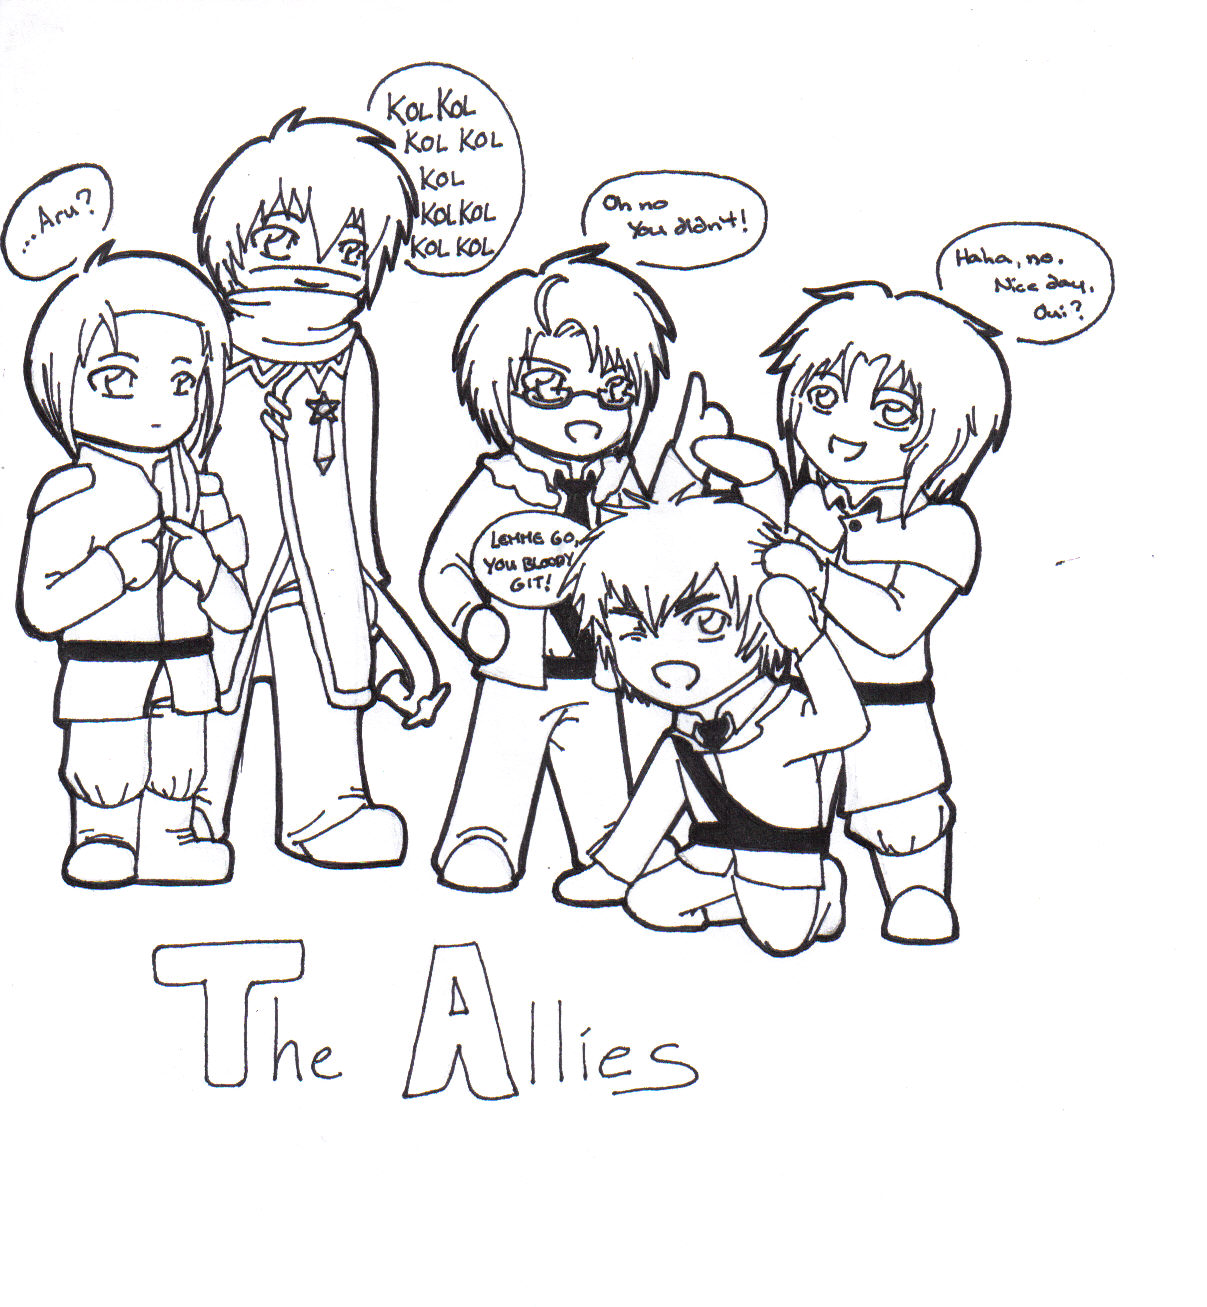 The Allies by DemonChild92